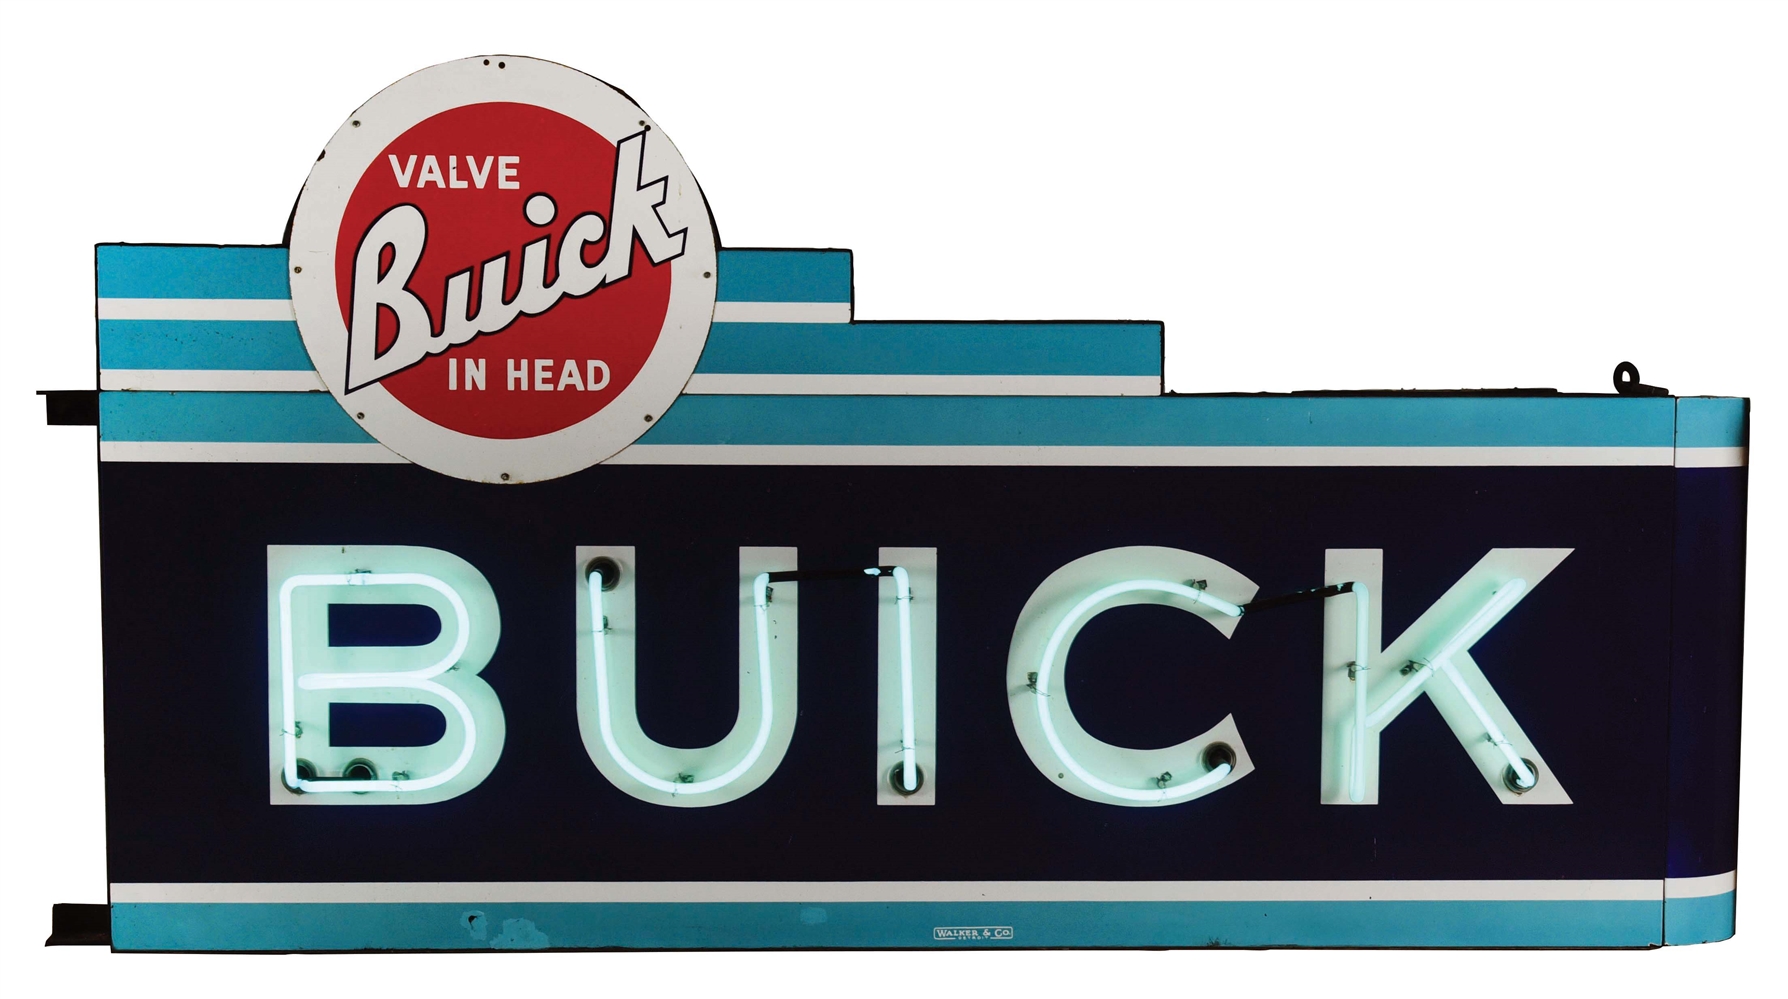 BUICK VALVE IN HEAD COMPLETE PORCELAIN NEON SIGN W/ BULLNOSE ATTACHMENT. 